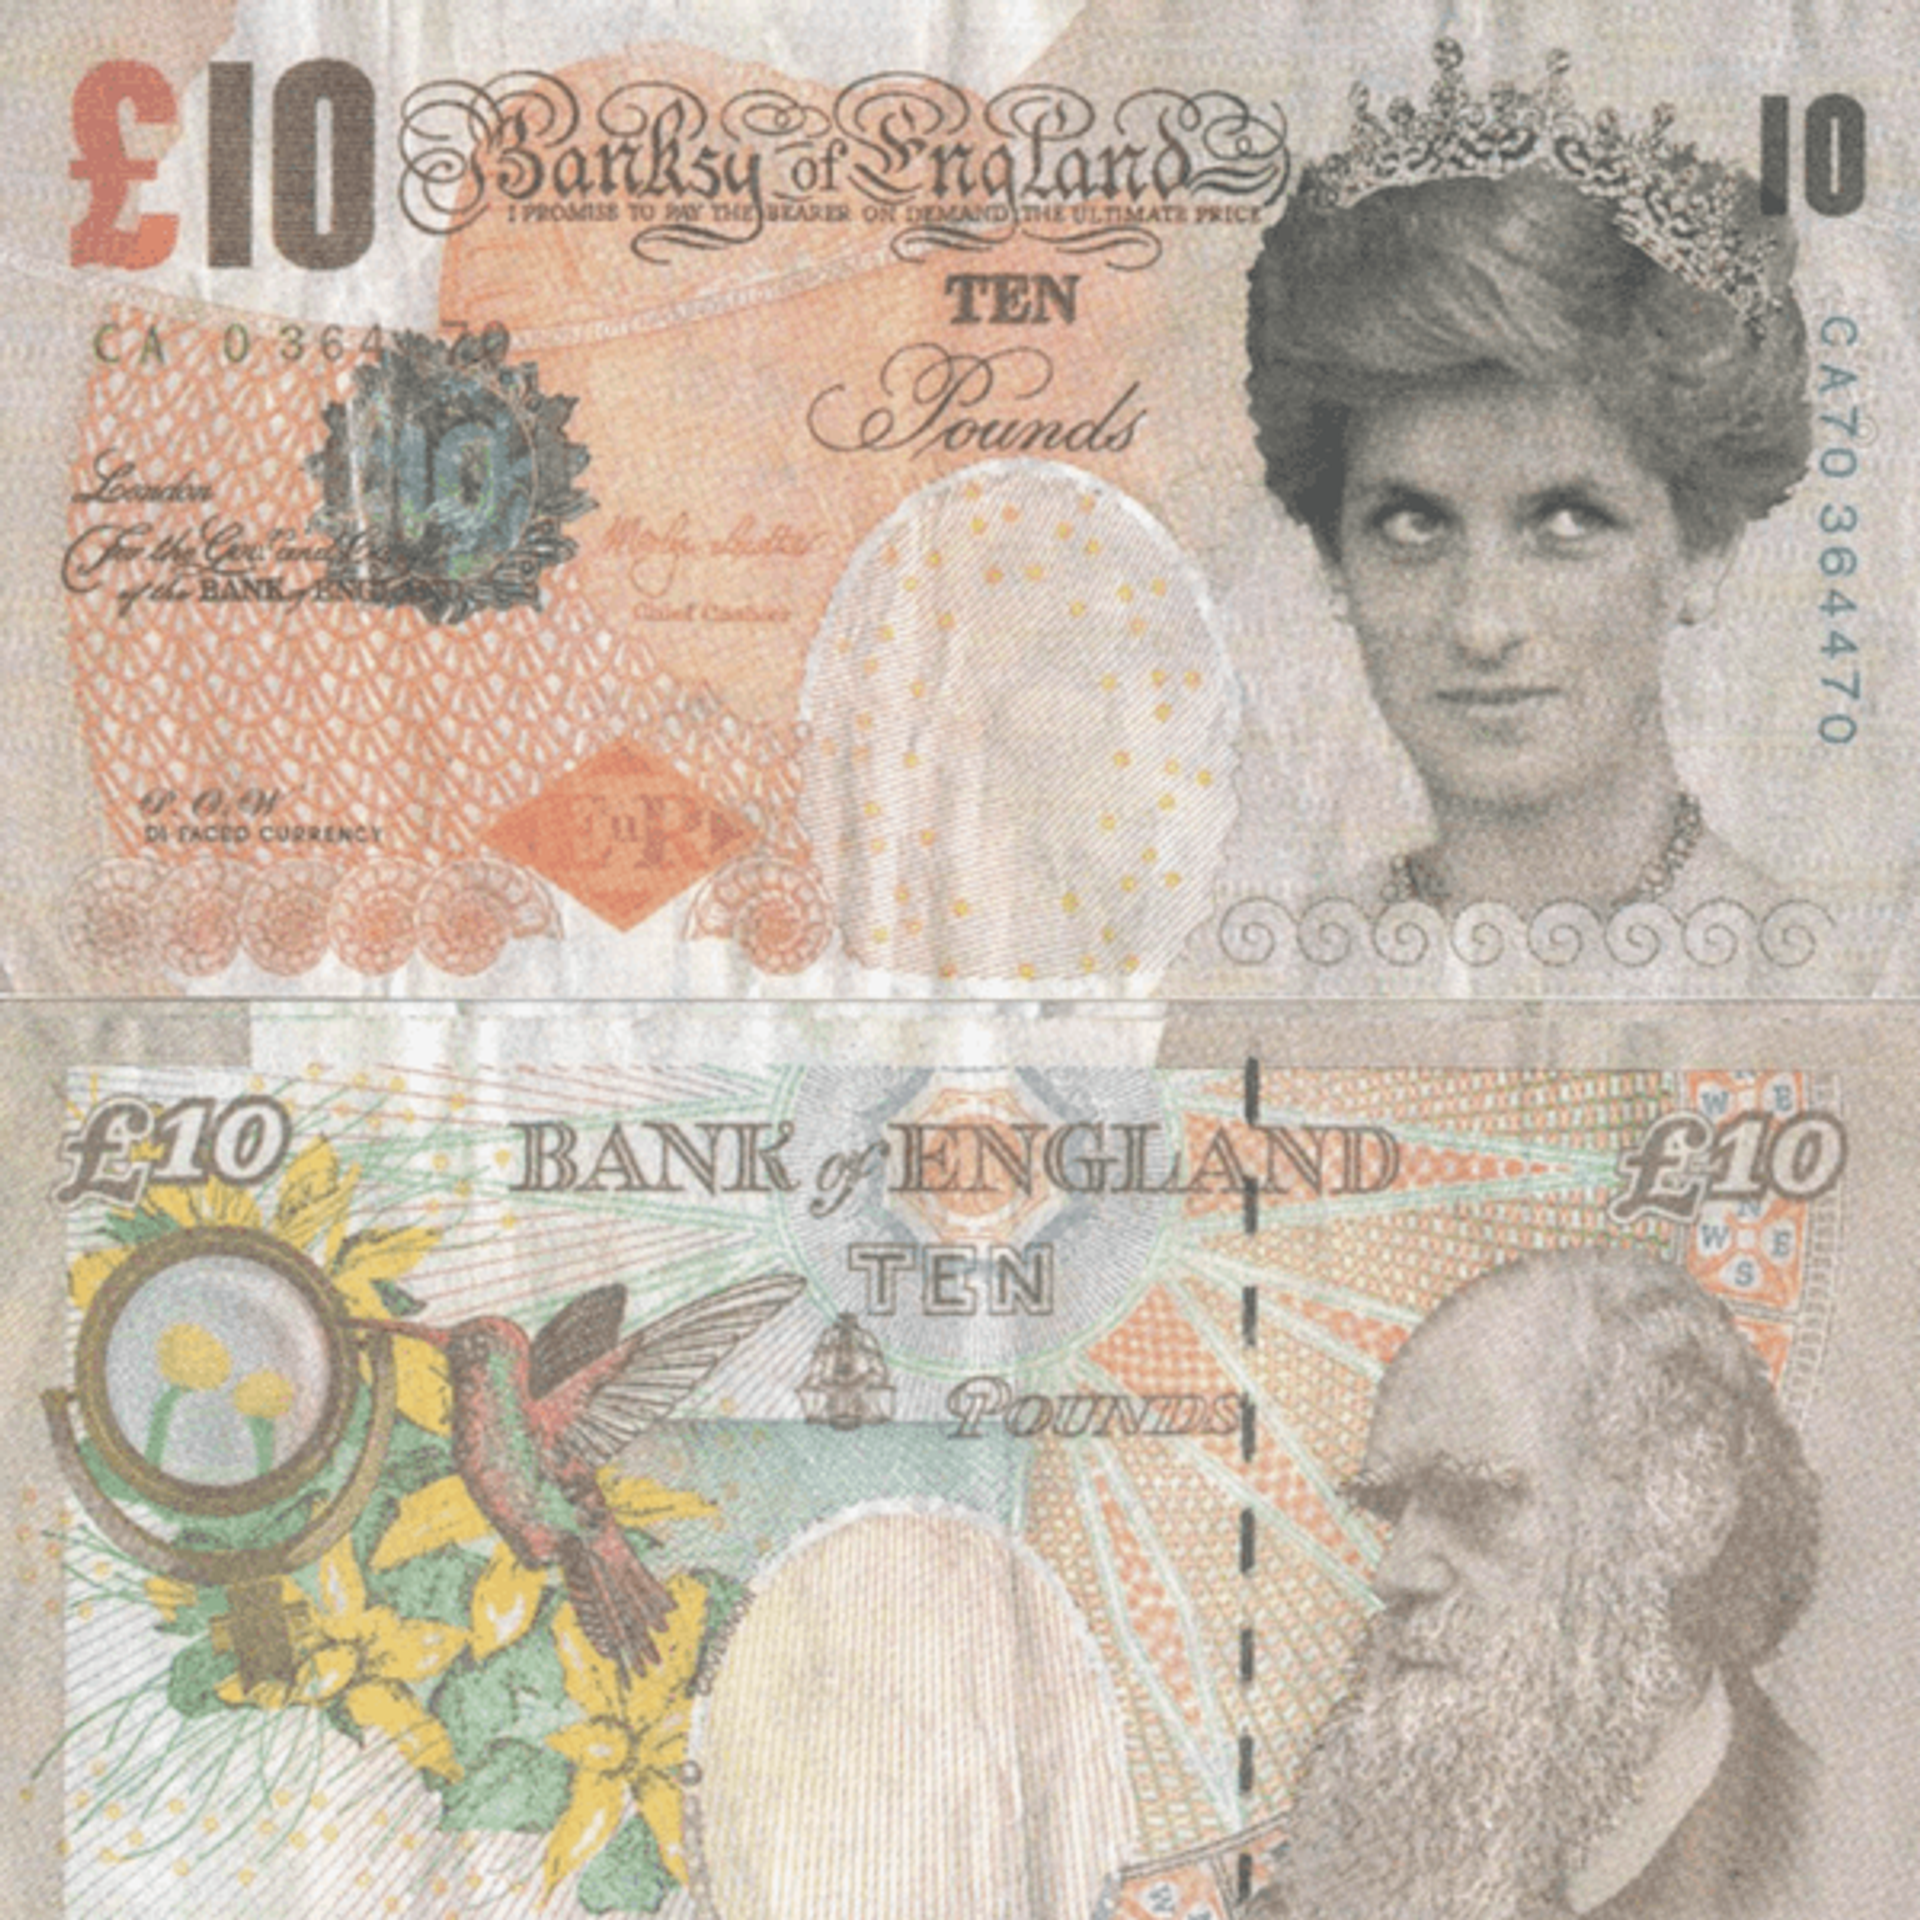 Di Faced Tenner by Banksy